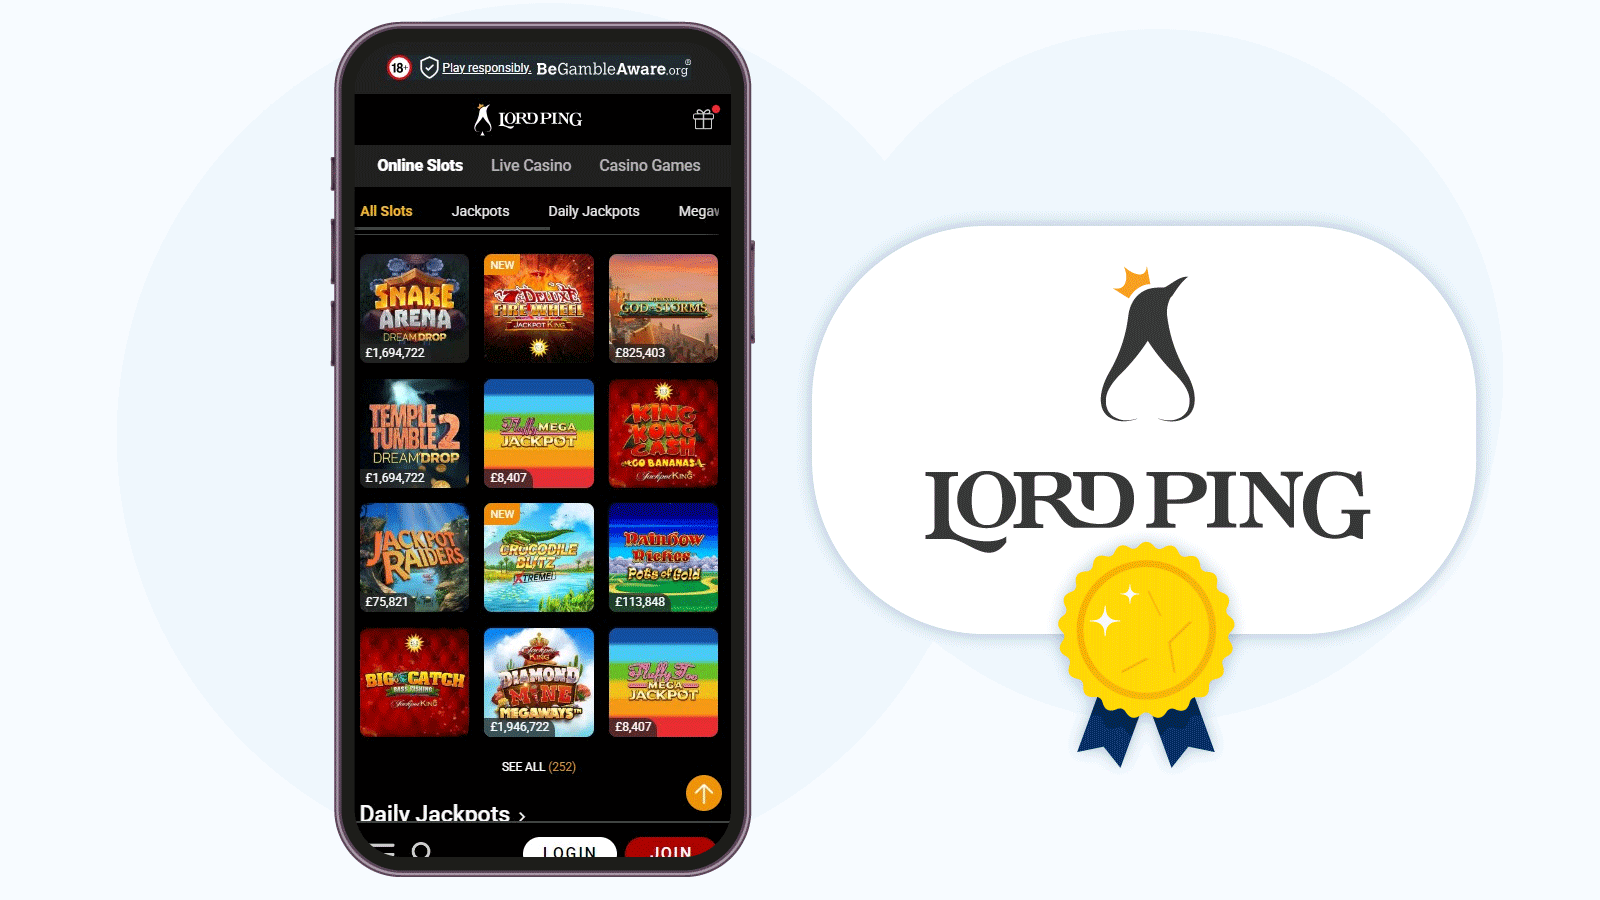 Lord Ping Casino slot games slection